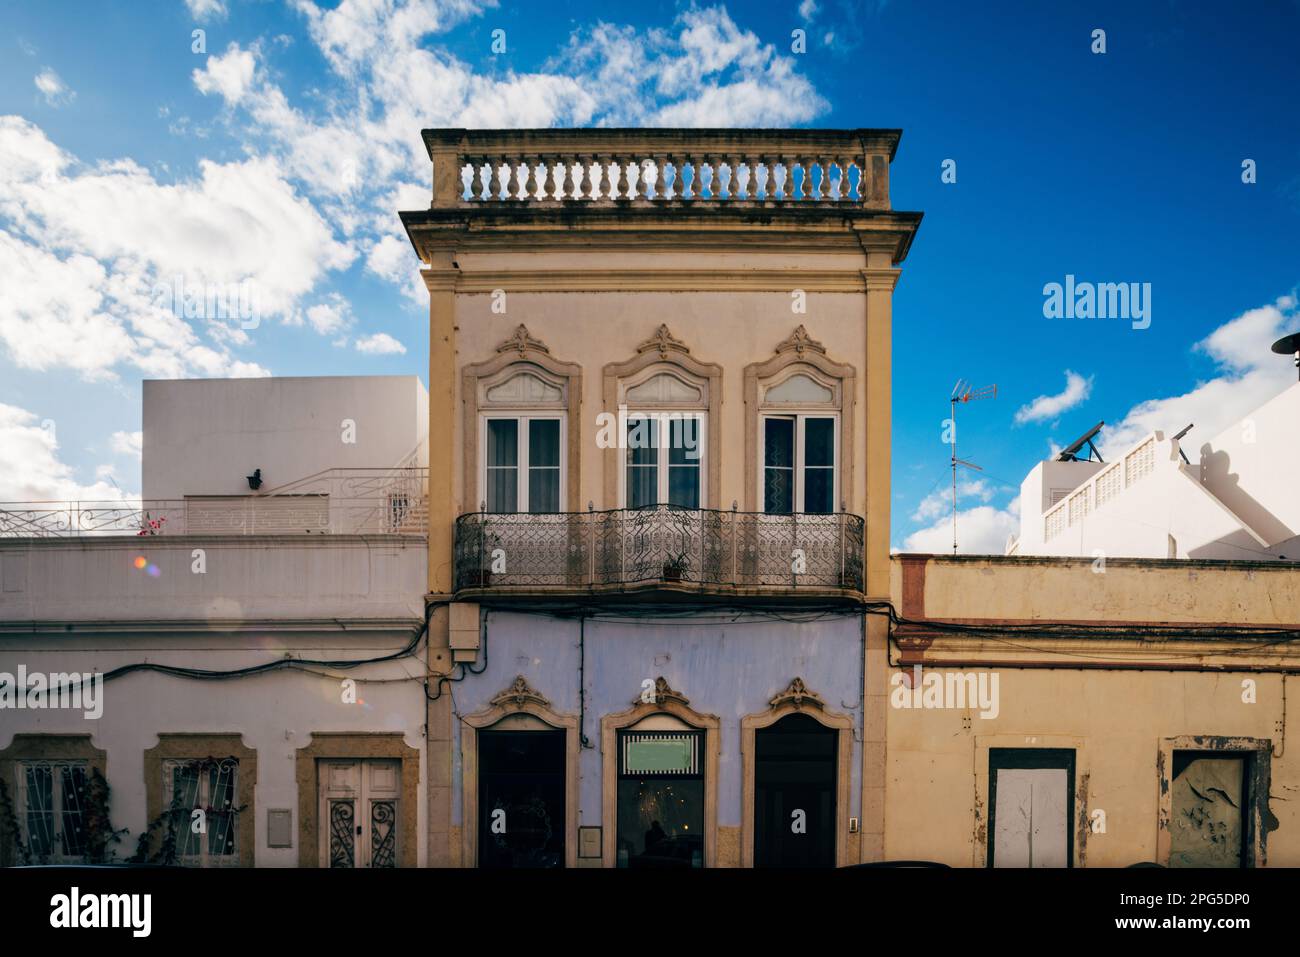 Typical architecture of Algarve vintage style buildings, located in Olhao, Portugal. Stock Photo